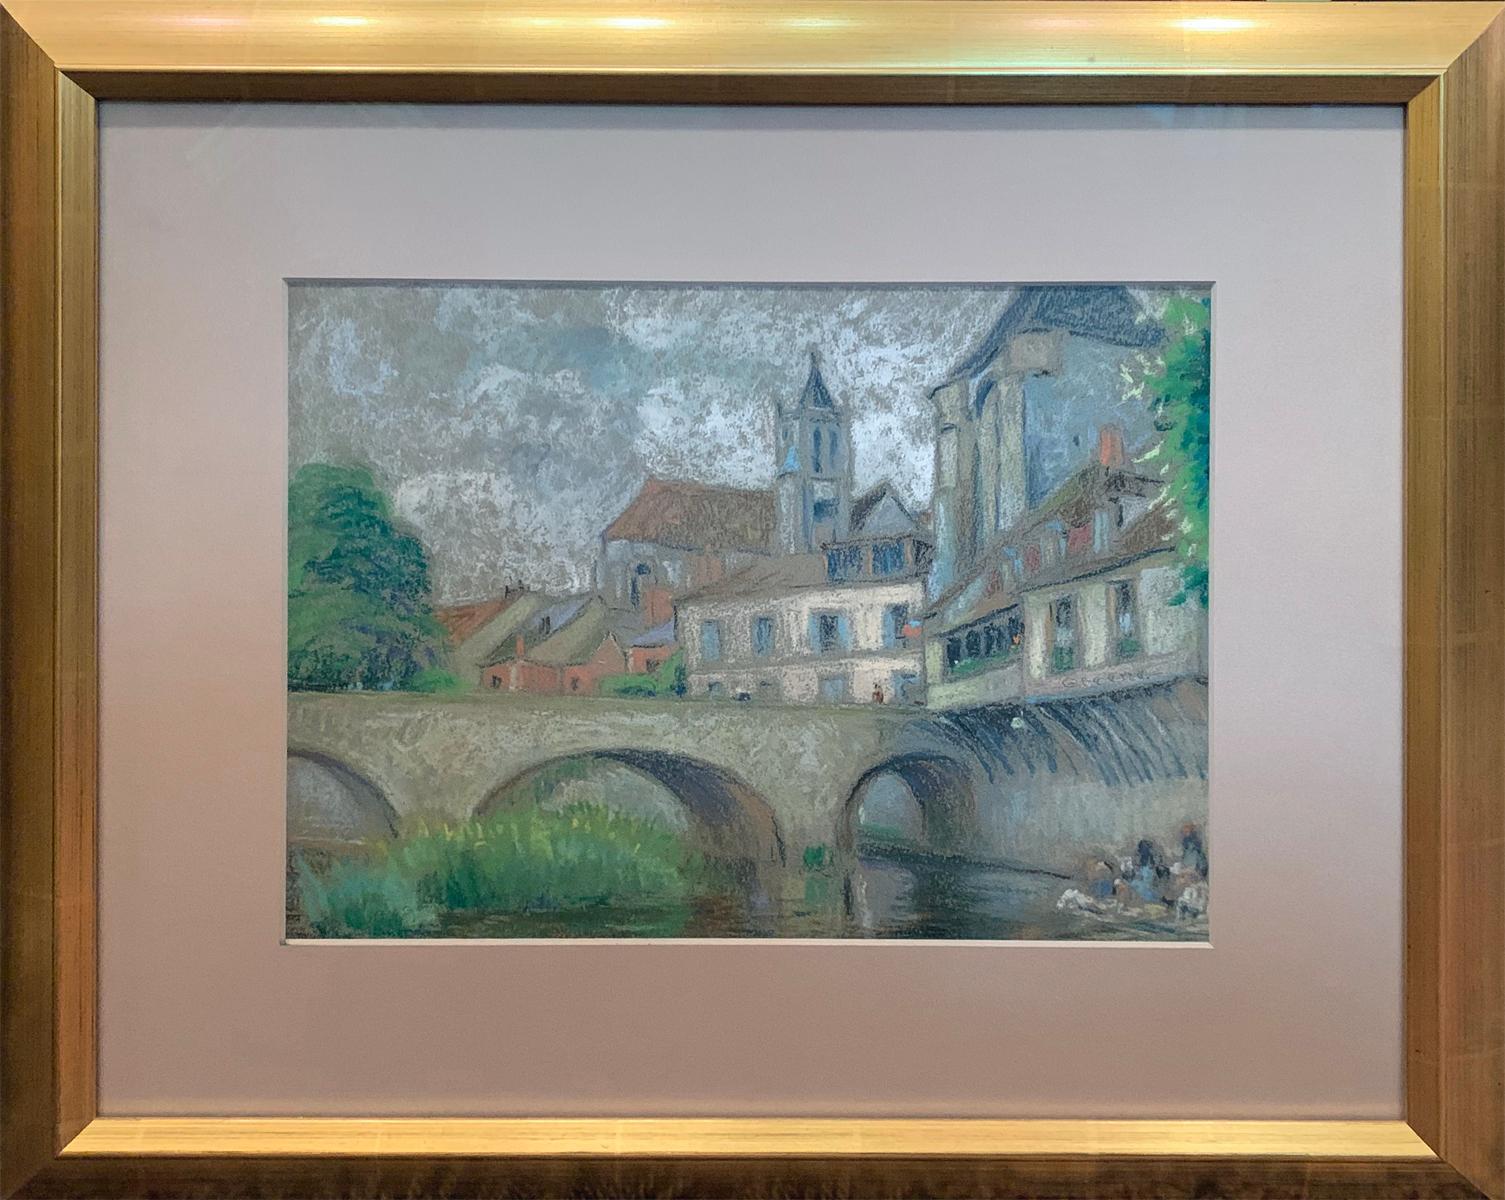 "Laundry Day In Paris" is a 9 3/4" x 13" pastel on paper Paris city scene by Albert Van Nesse Greene. It is matted and framed, and signed "A V Greene" at the lower left. The painting came from a private collection in Chester Springs, Pennsylvania.